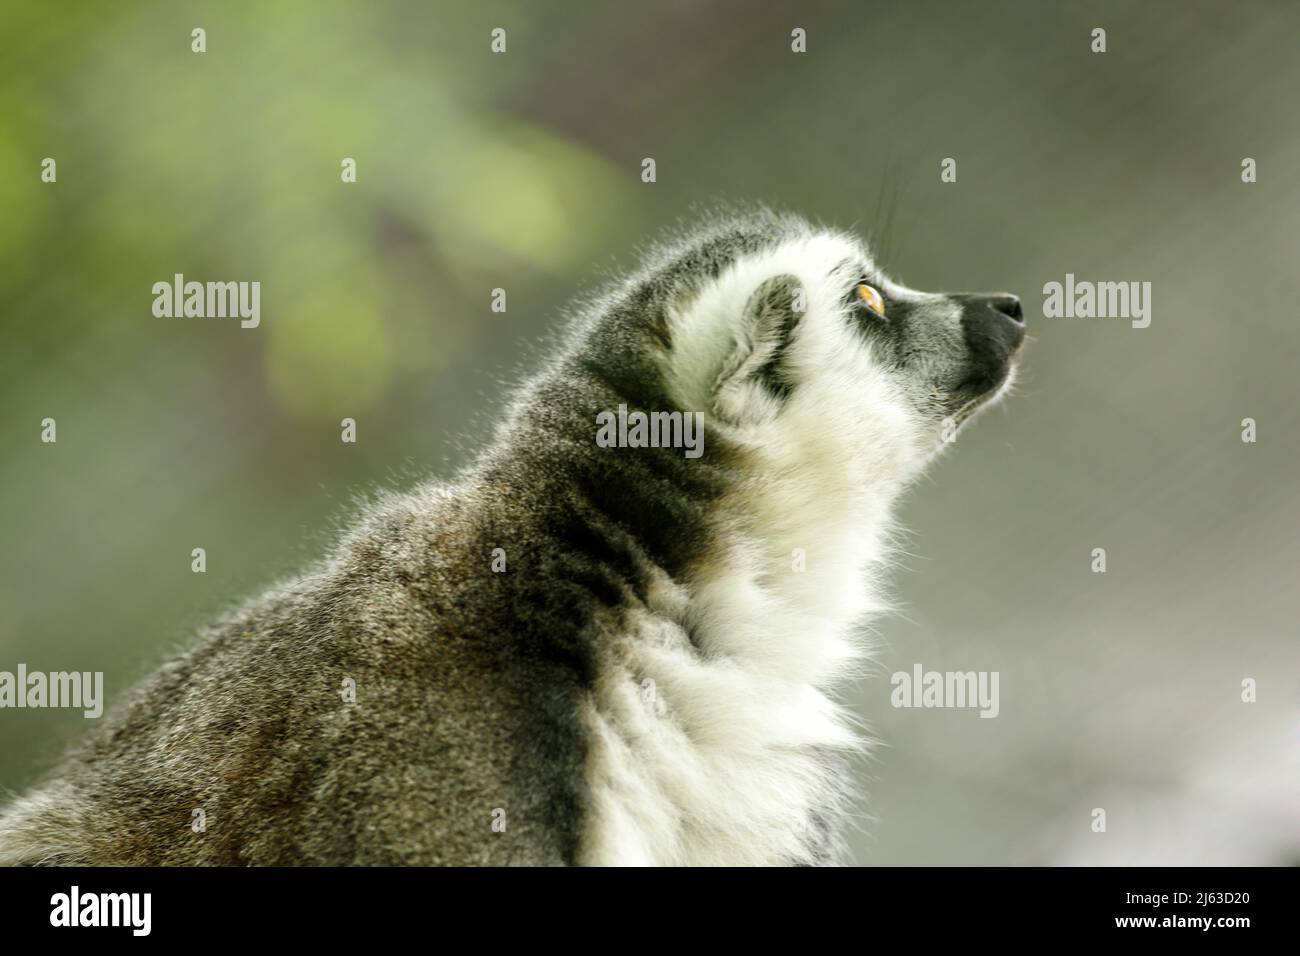 Ring-tailed Lemurs,  Lemur catta, are best known for their long, thick, black-and-white striped tails that can measure over 2 feet in length. The ring Stock Photo